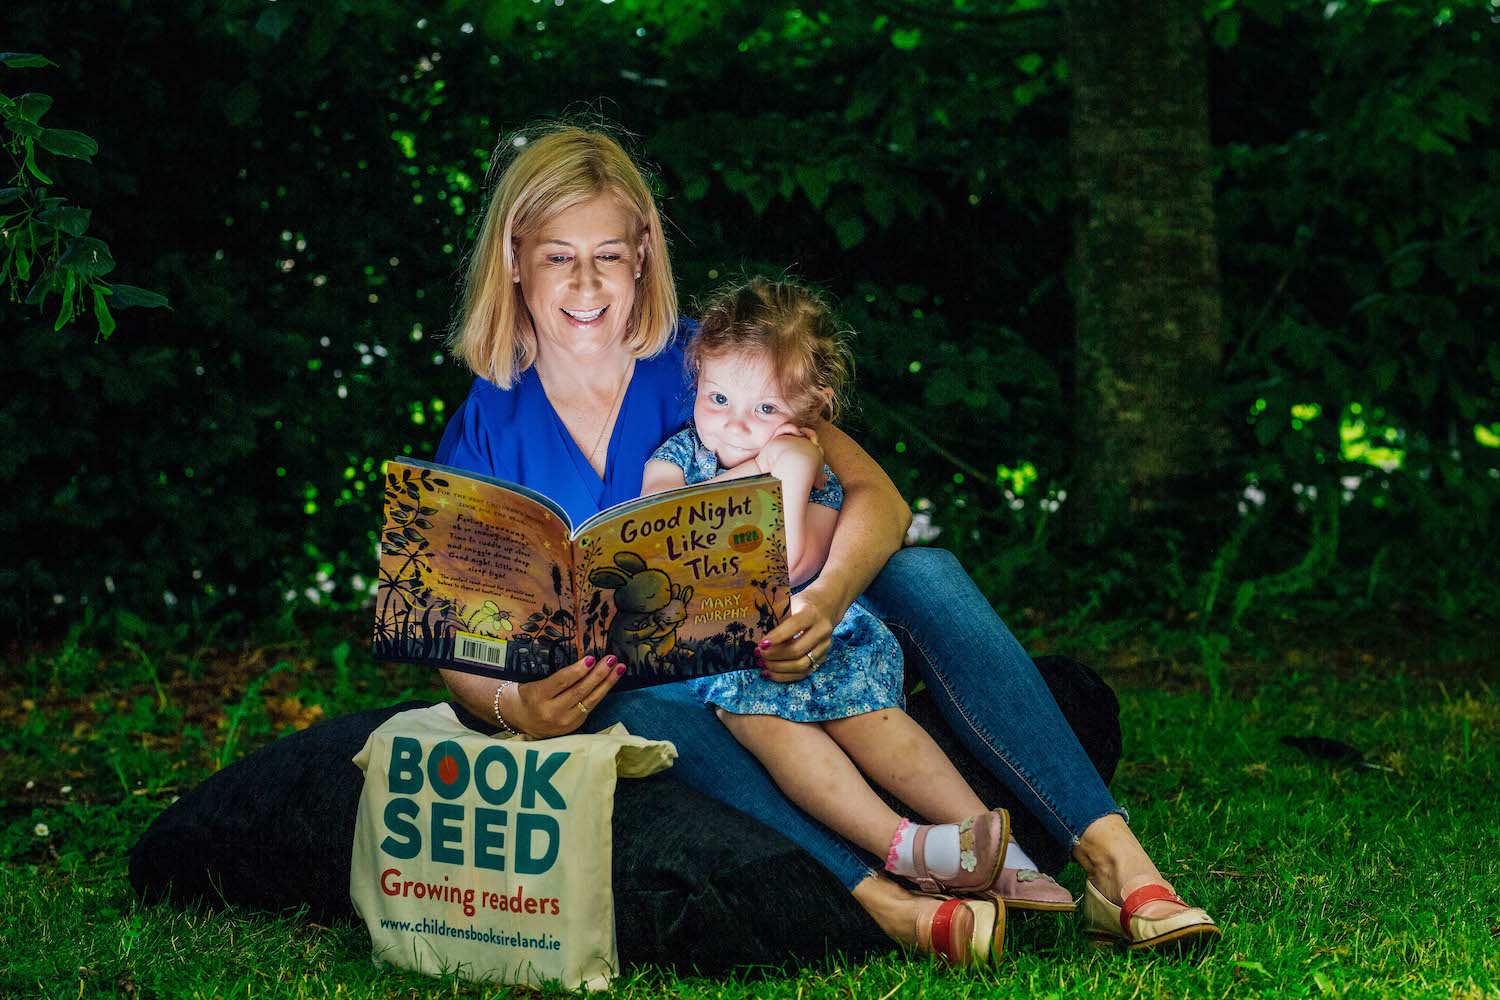 Bookseed baby bookgifting project - Lana Gaughan (age 3) with her mam Cara pictured at the re-launch of the Bookseed baby bookgifting project in Limerick. Picture: Brian Arthur.